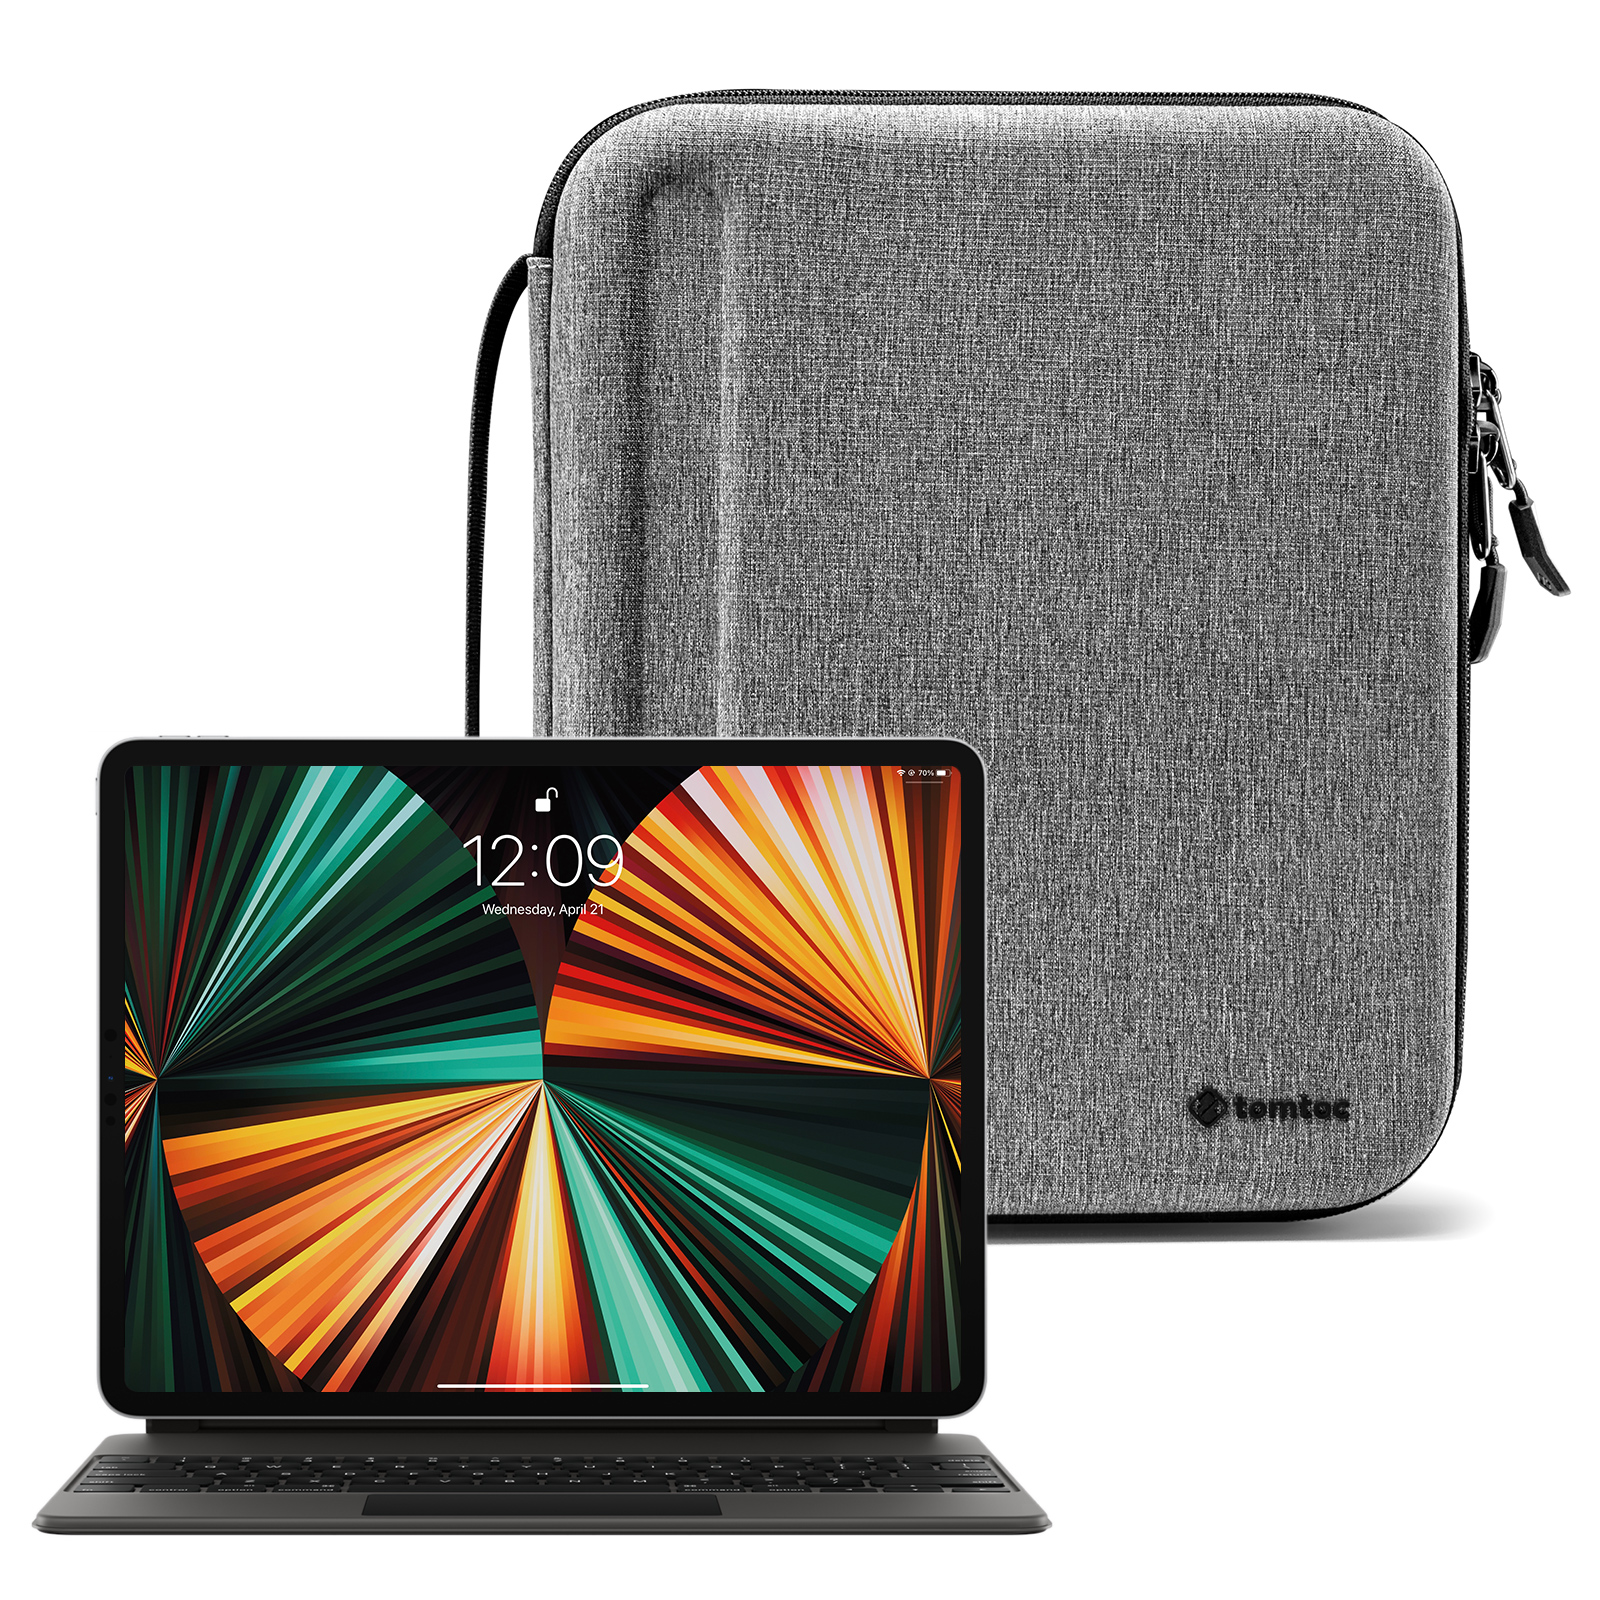 tomtoc Portfolio Case for iPad Pro 12.9-inch 2021/2020/2018, Protective  Sleeve with Accessories Pocket, Carrying Storage Bag for iPad